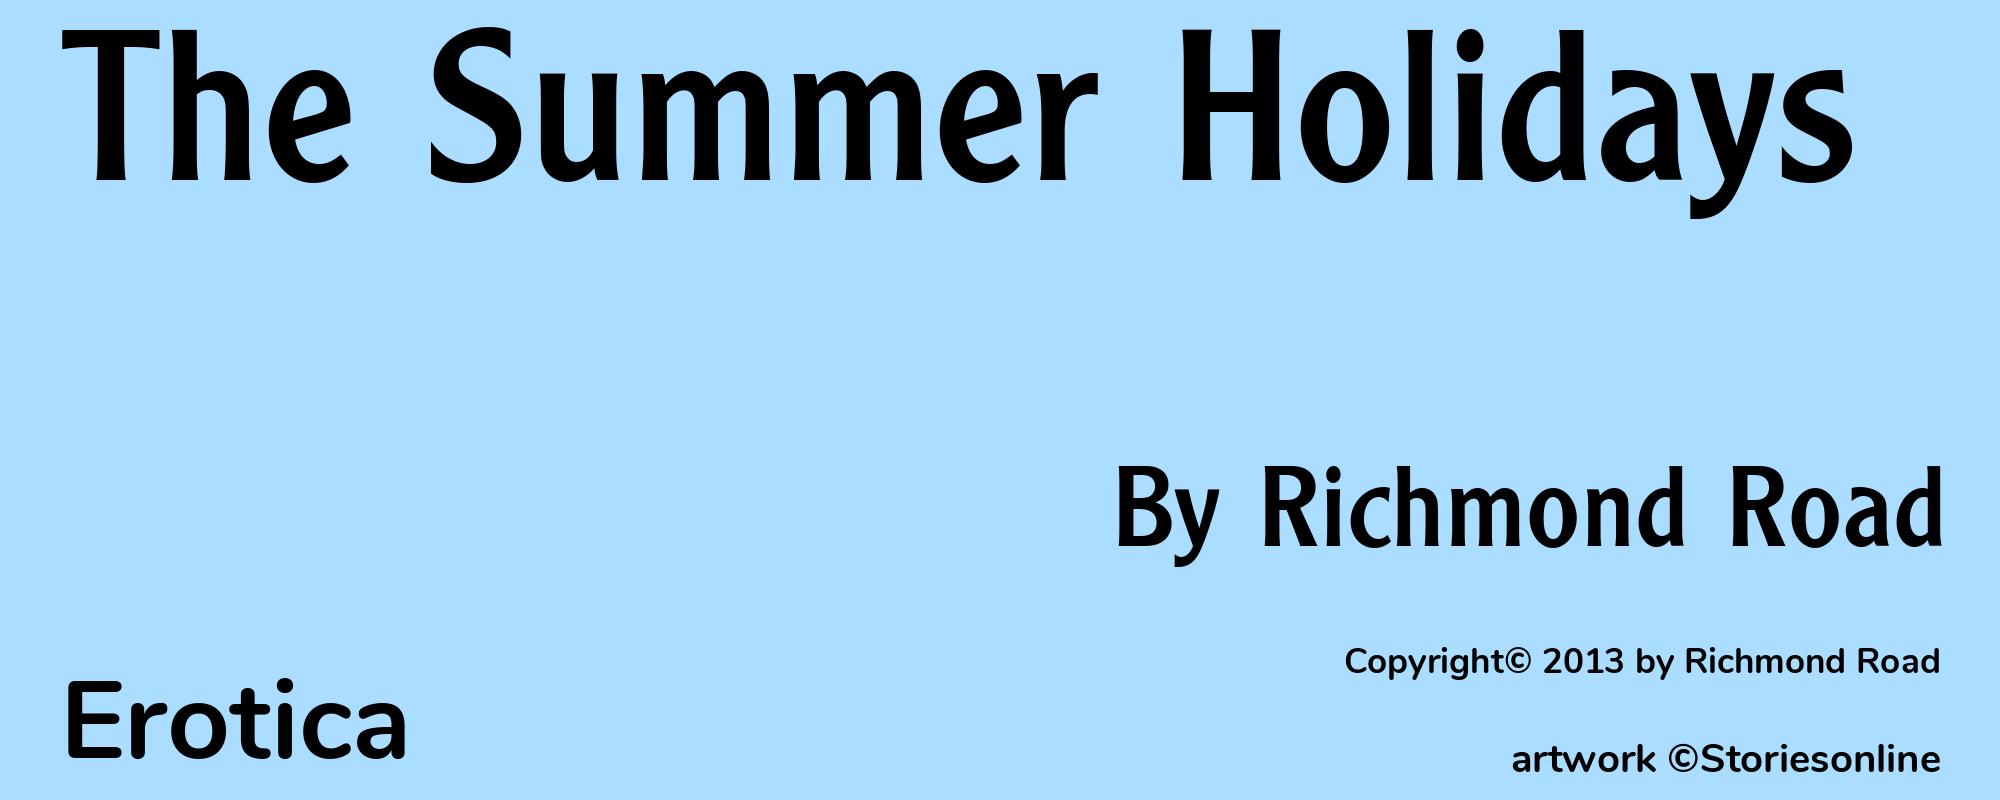 The Summer Holidays - Cover